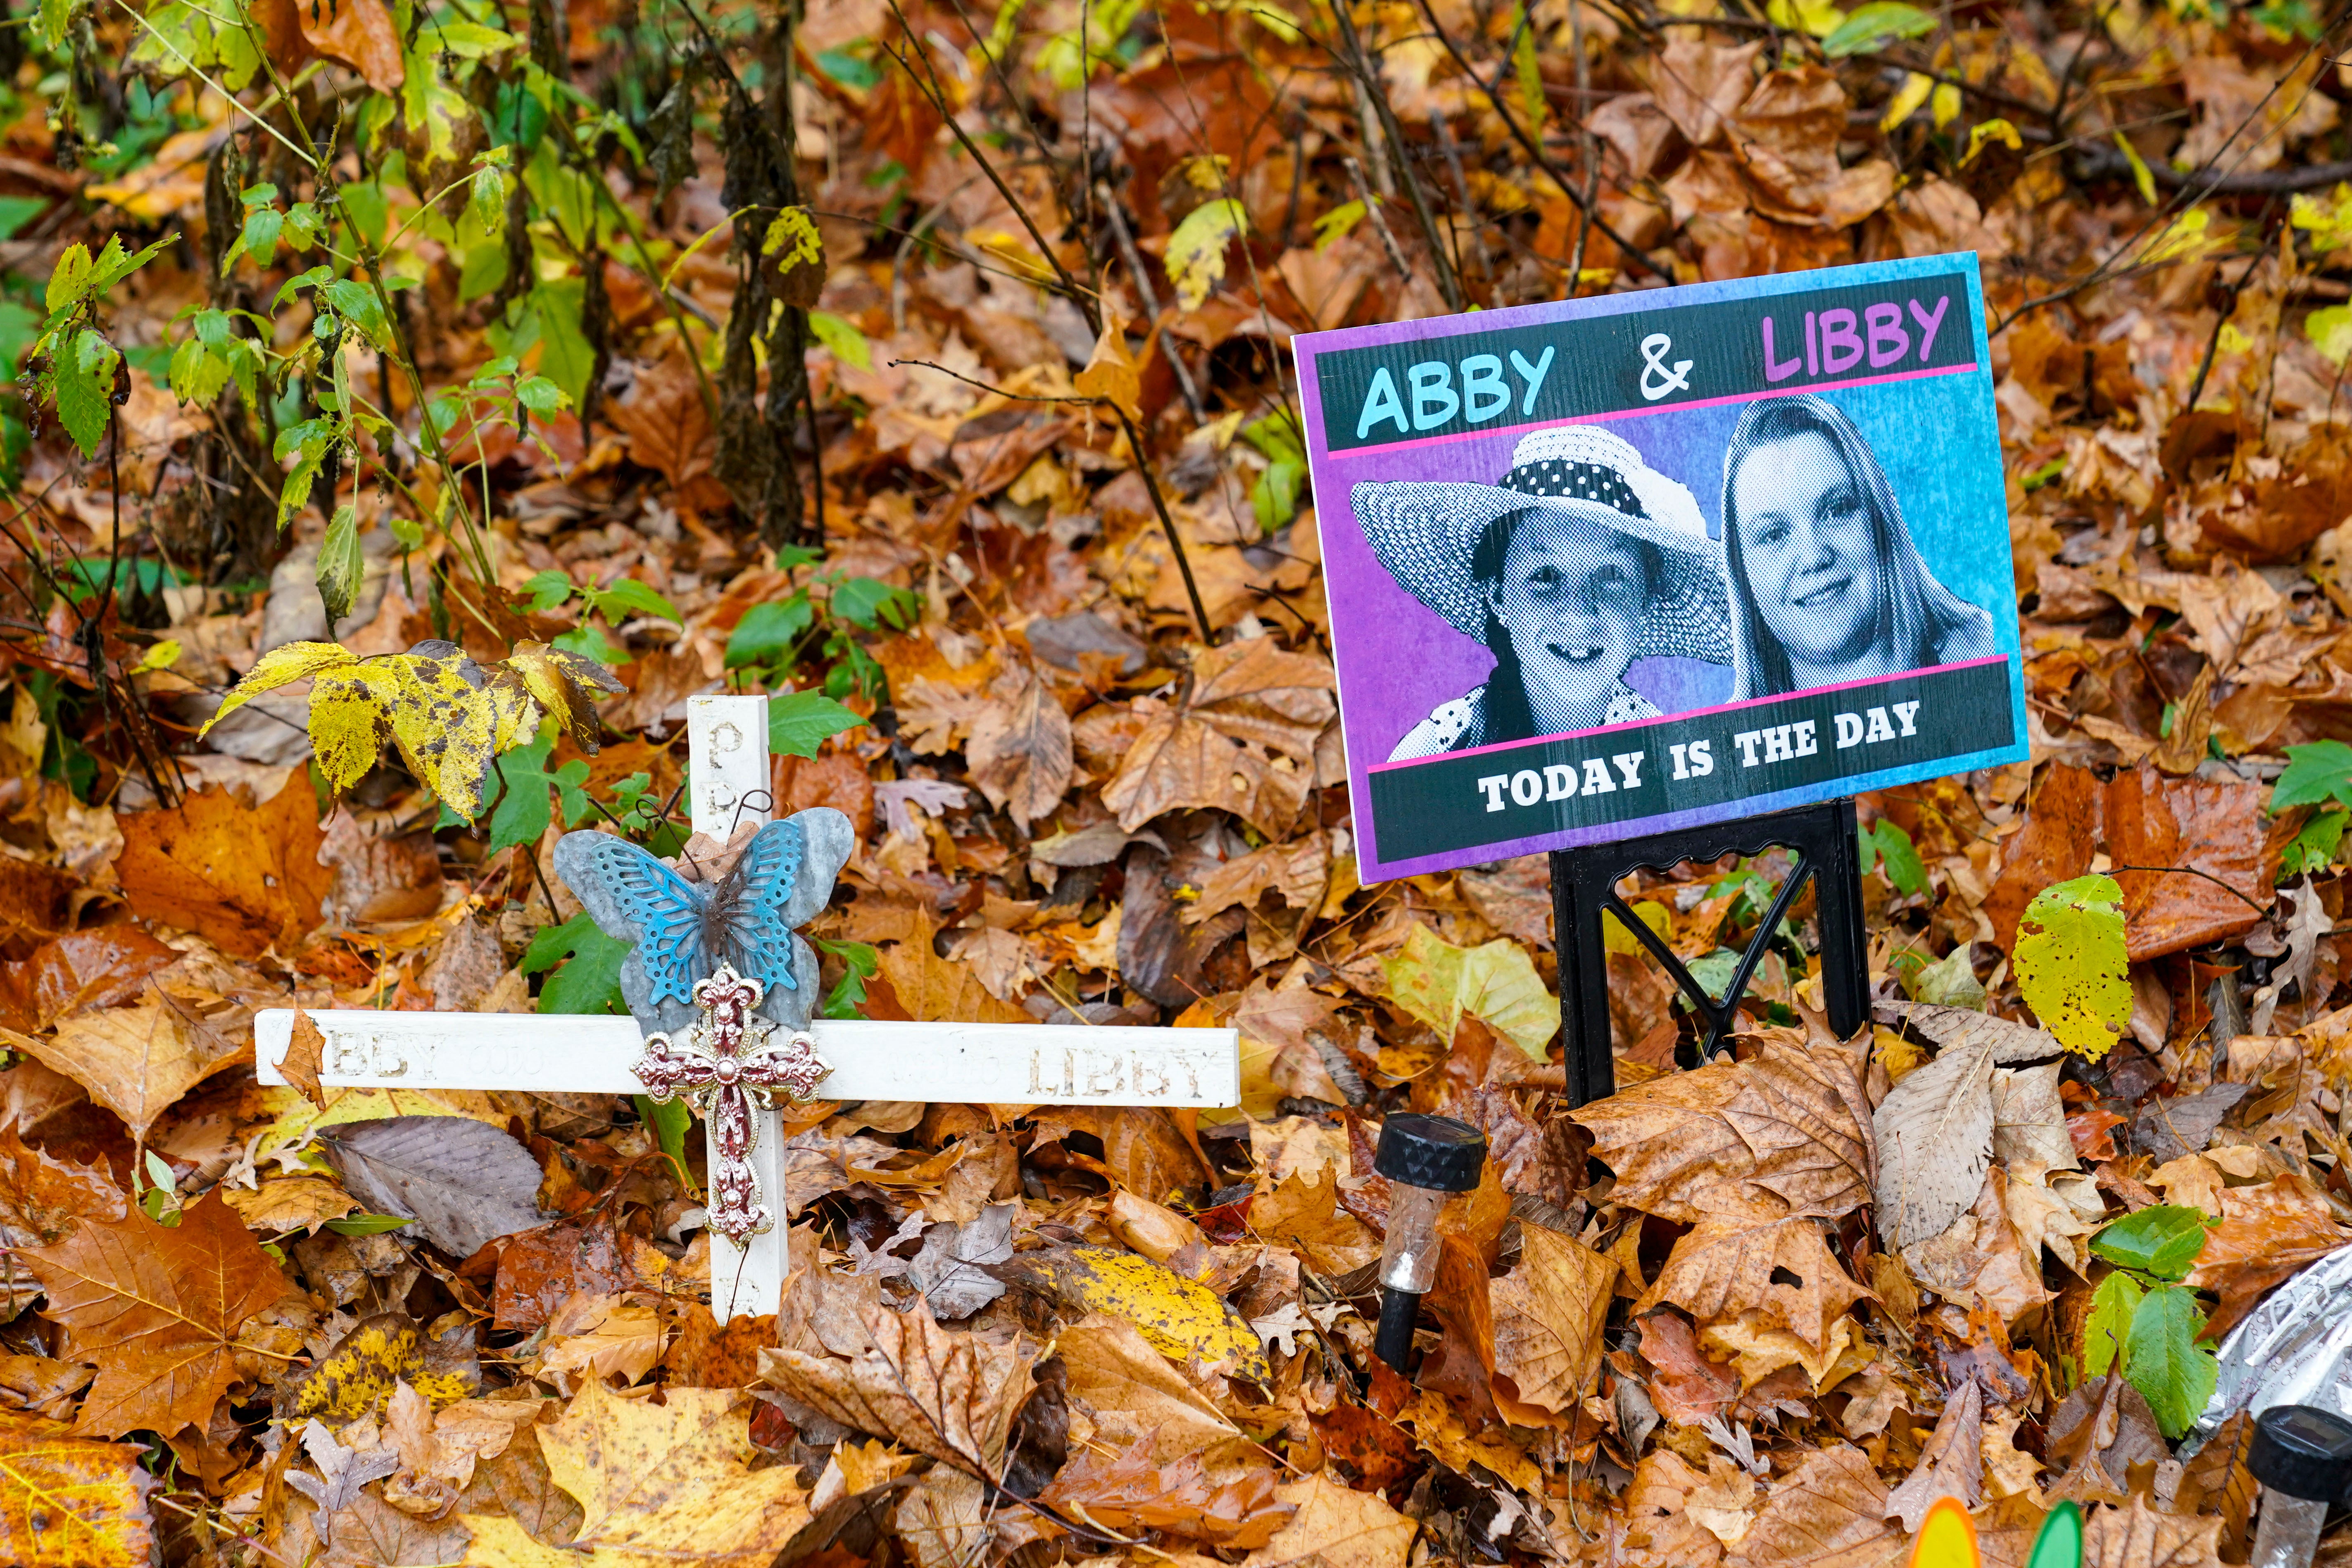 A makeshift memorial for Libby and Abby close to where their bodies were found